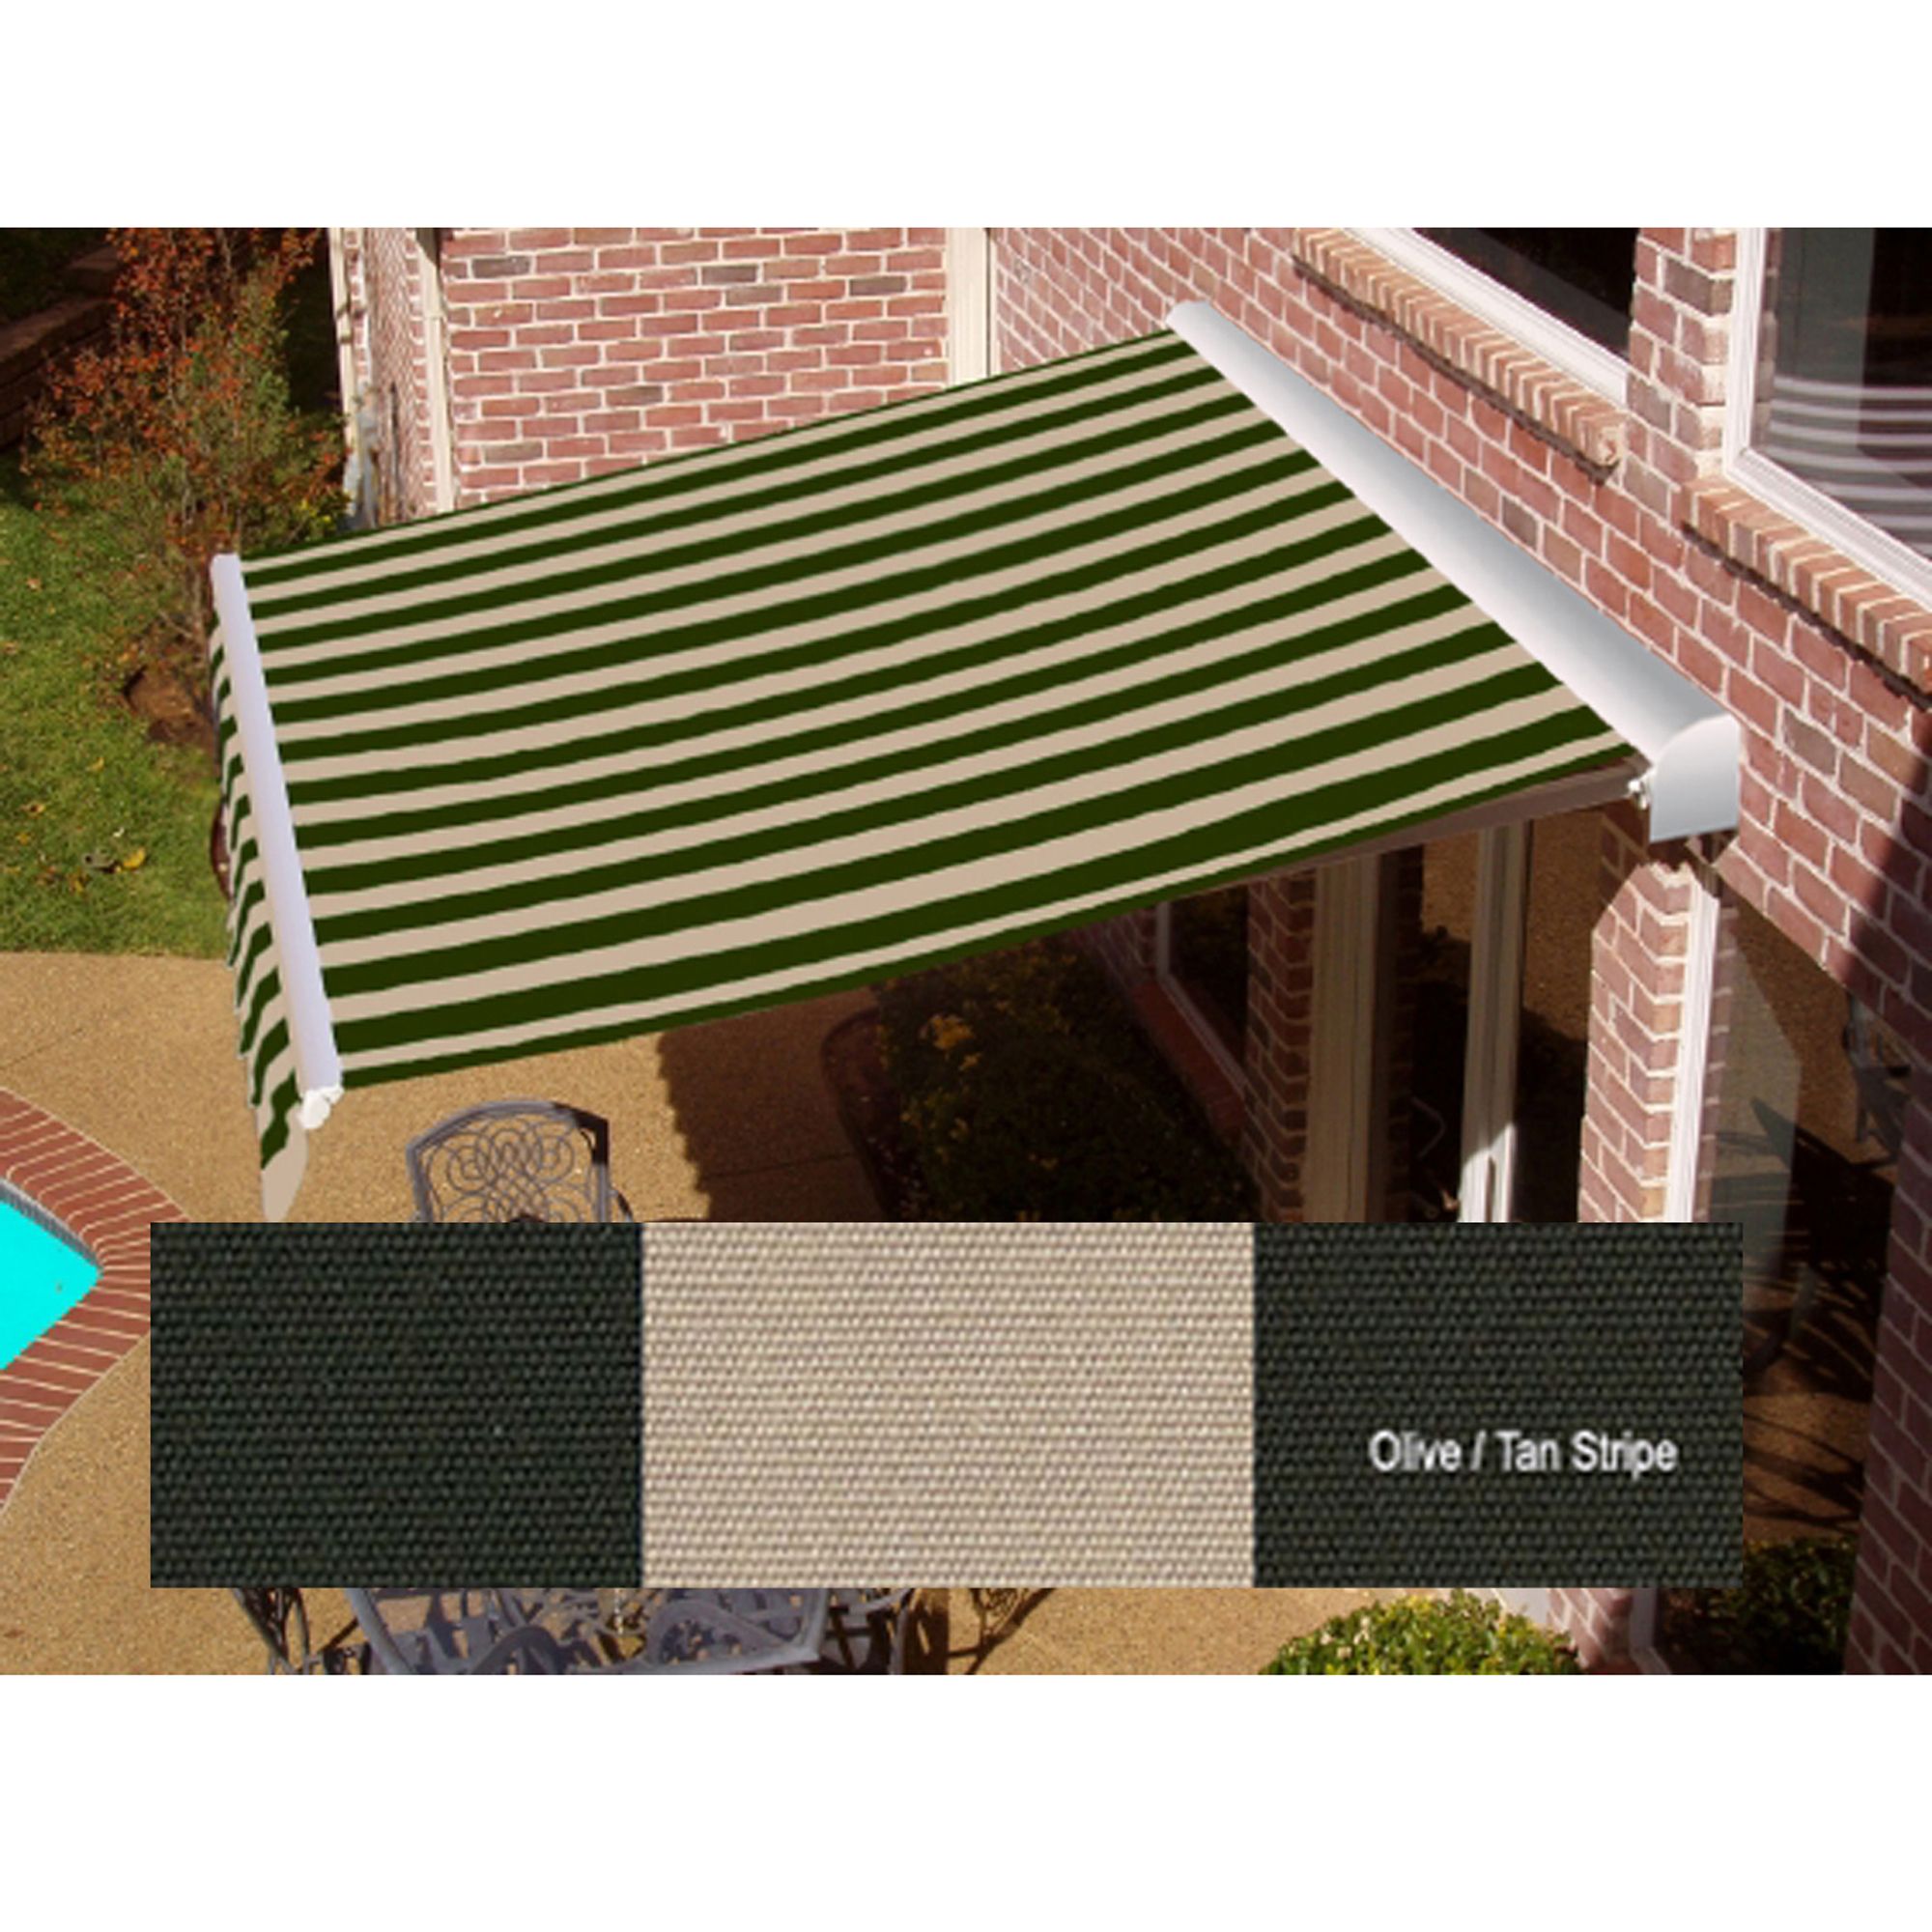 DESTIN&#174; LX Manual Retractable Awning  with Hood - Olive/Tan